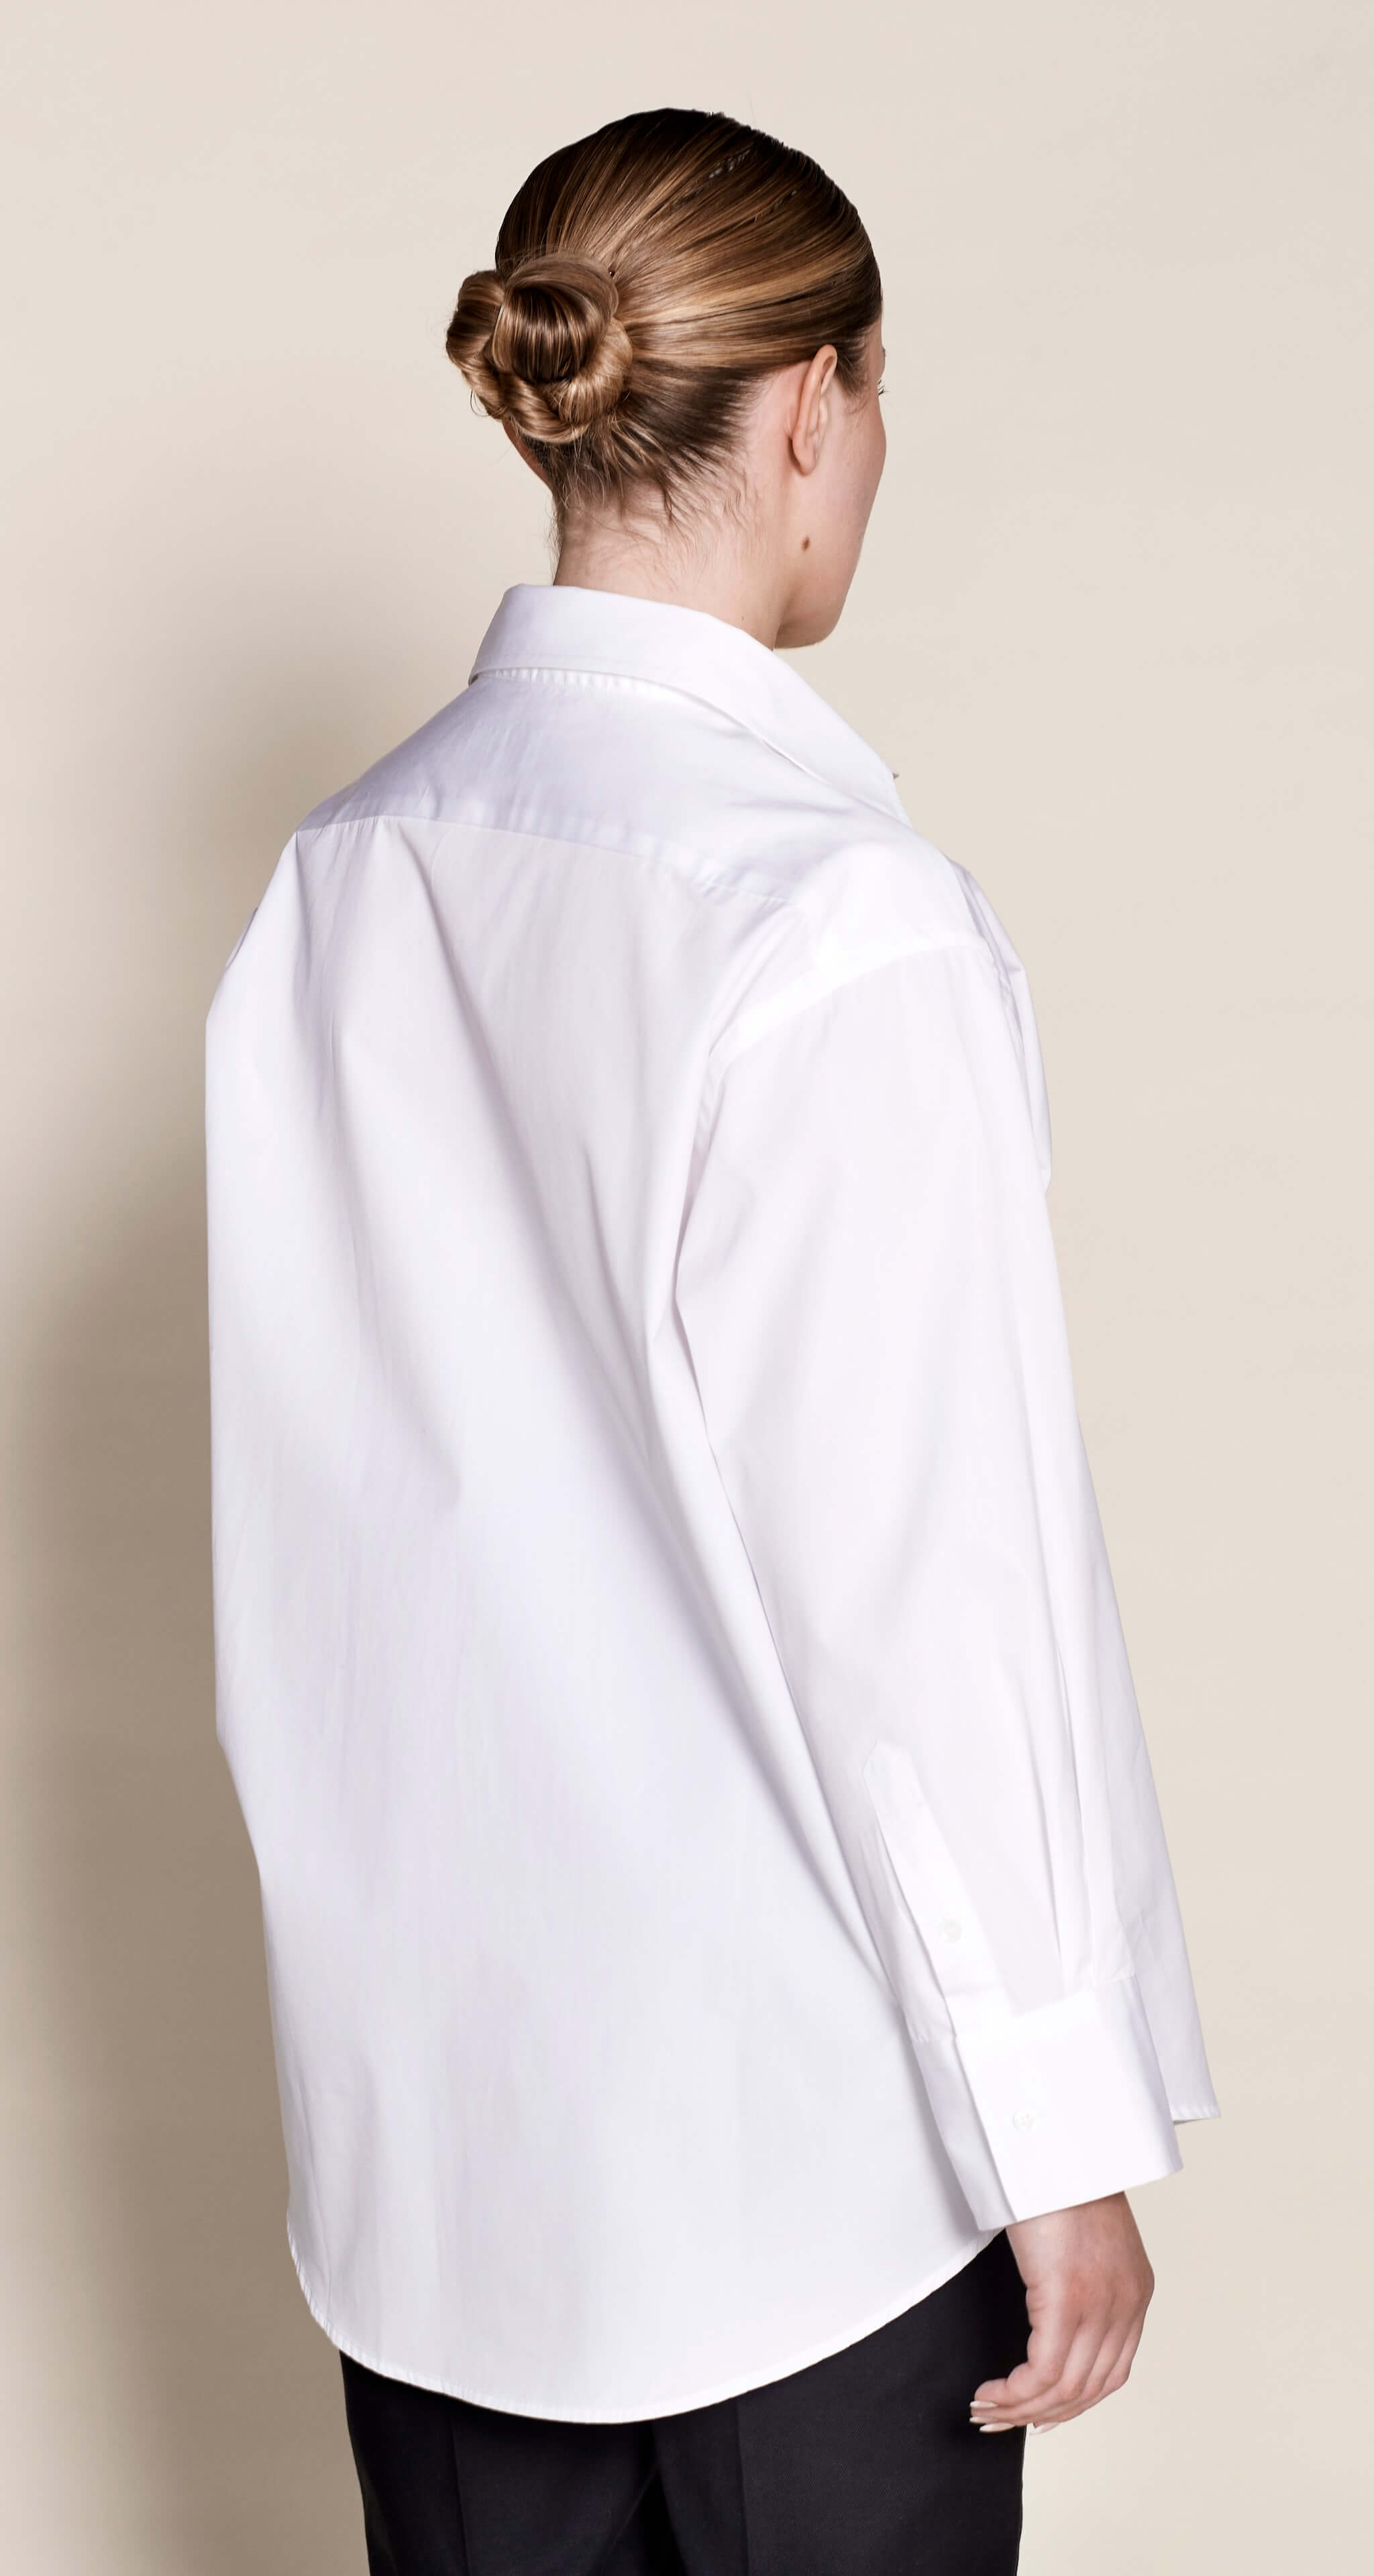 Elegant back view of a Cyme Copenhagen white cotton shirt, highlighting the meticulous design and sustainable fashion ethos of the Danish brand.